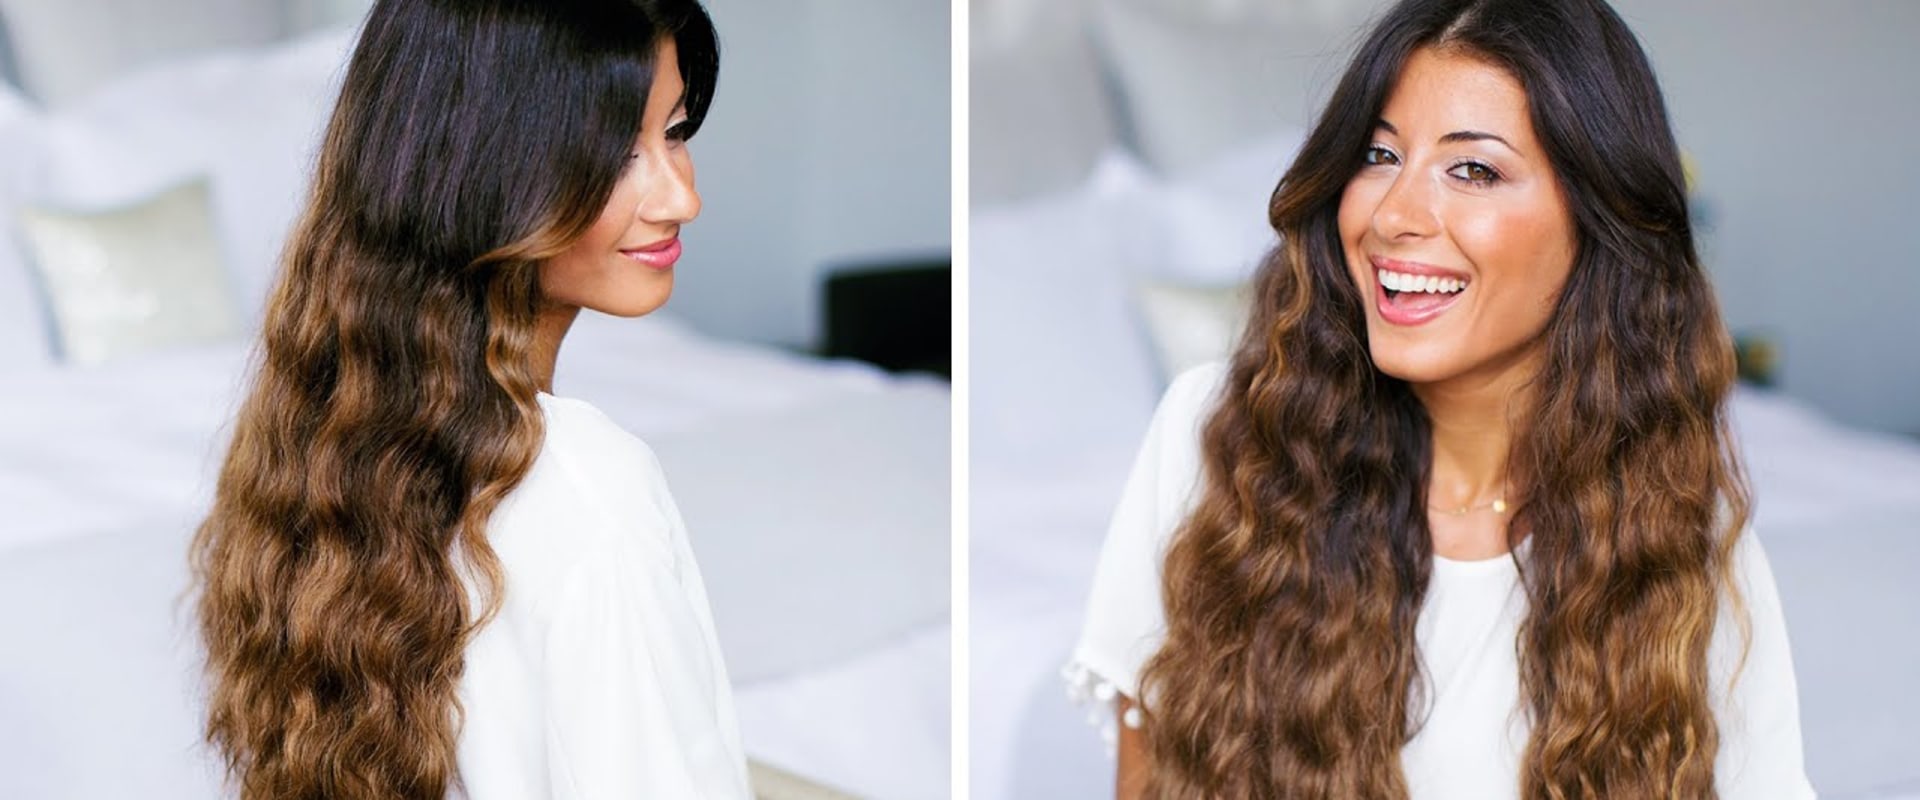 Heatless Curls for Long Hair on Women - Styling Tips and Tricks